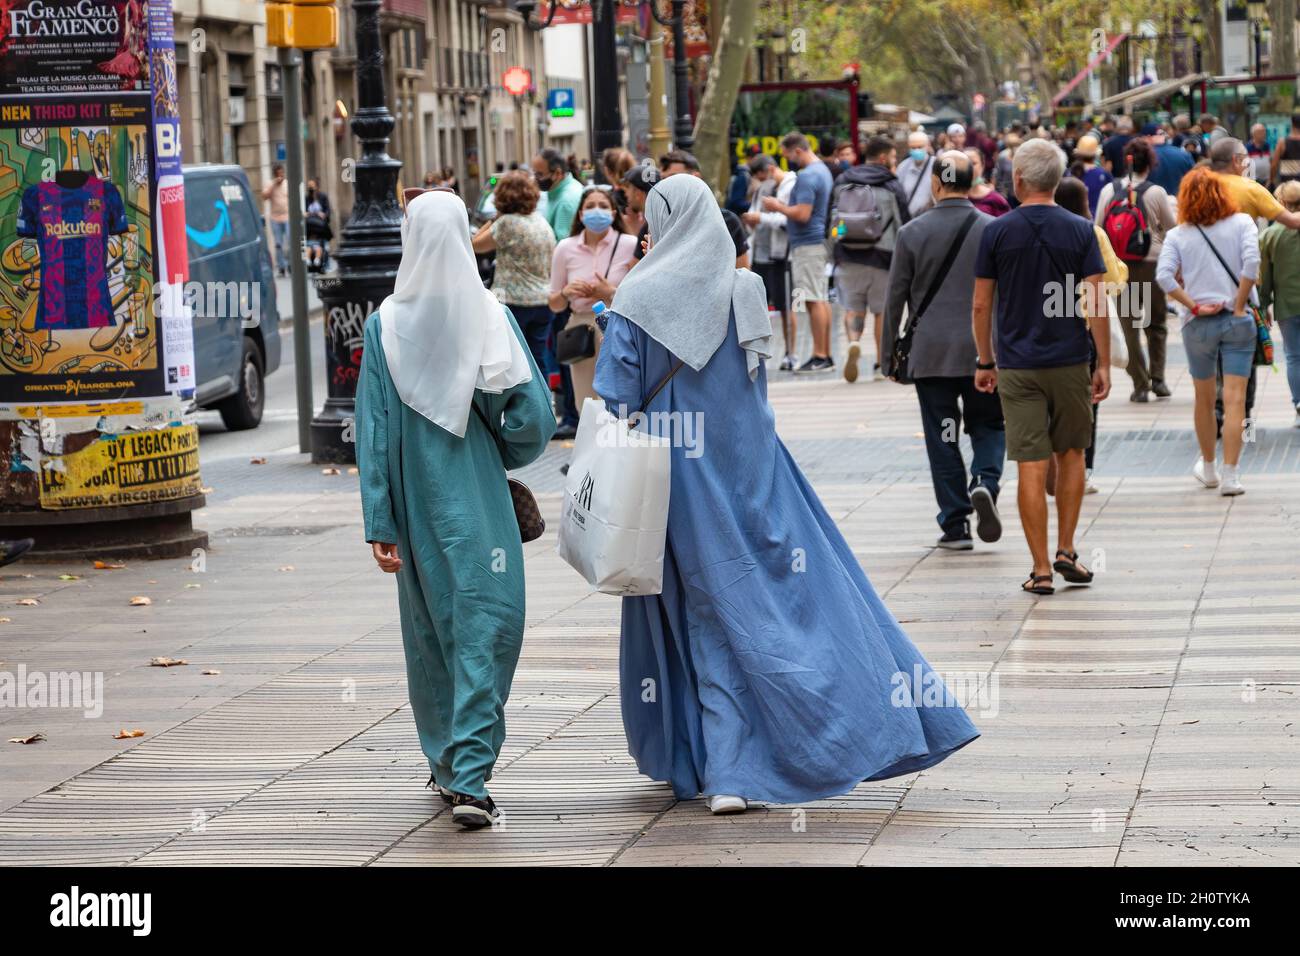 Barcelona, Spain - September 19, 2021: Muslim women wearing  traditional Islamic clothing, are going for shopping Stock Photo